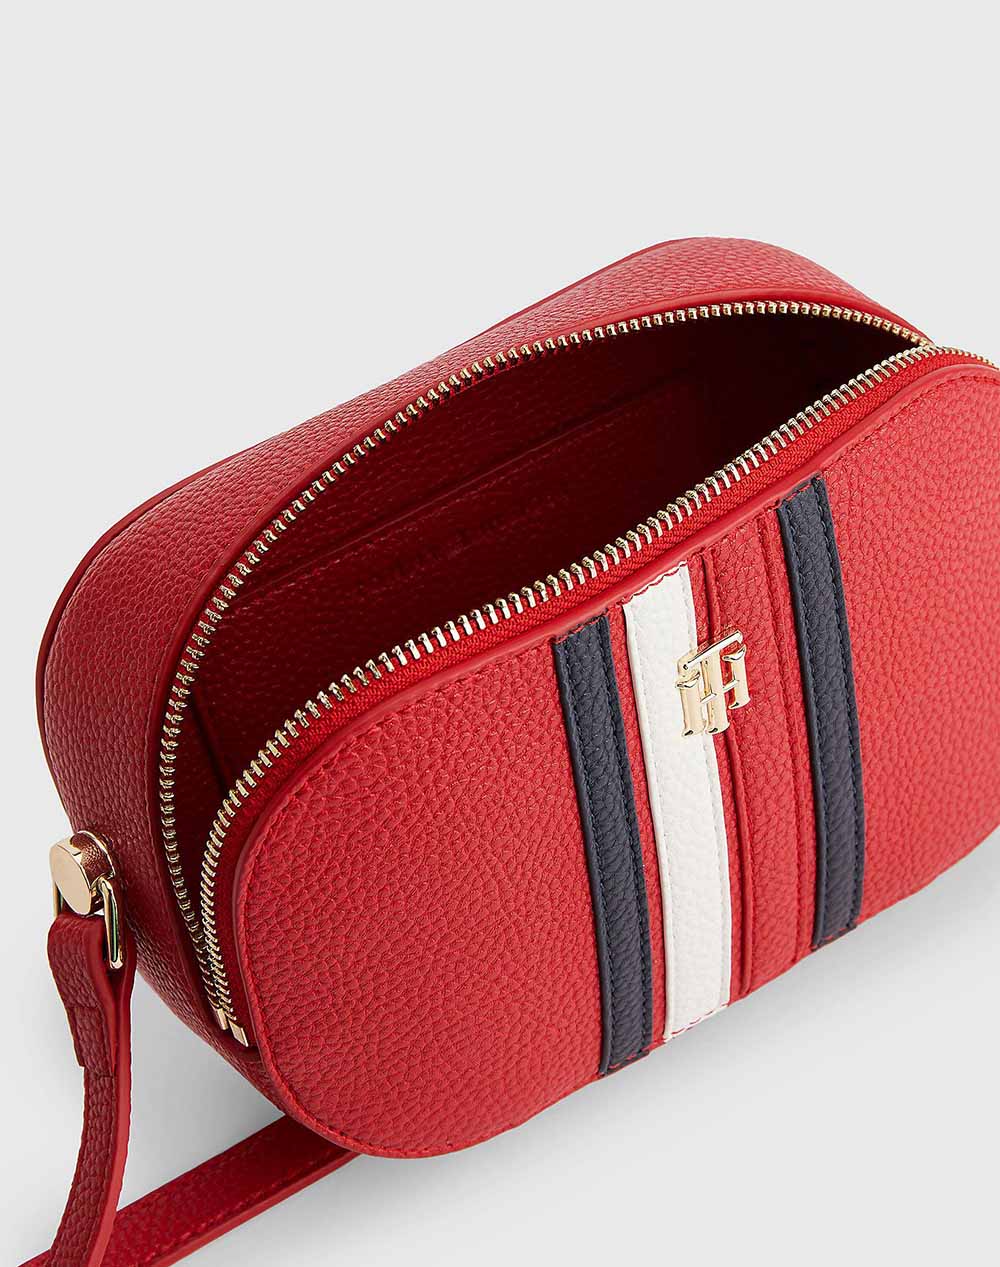 Th Element Camera Bag - Red